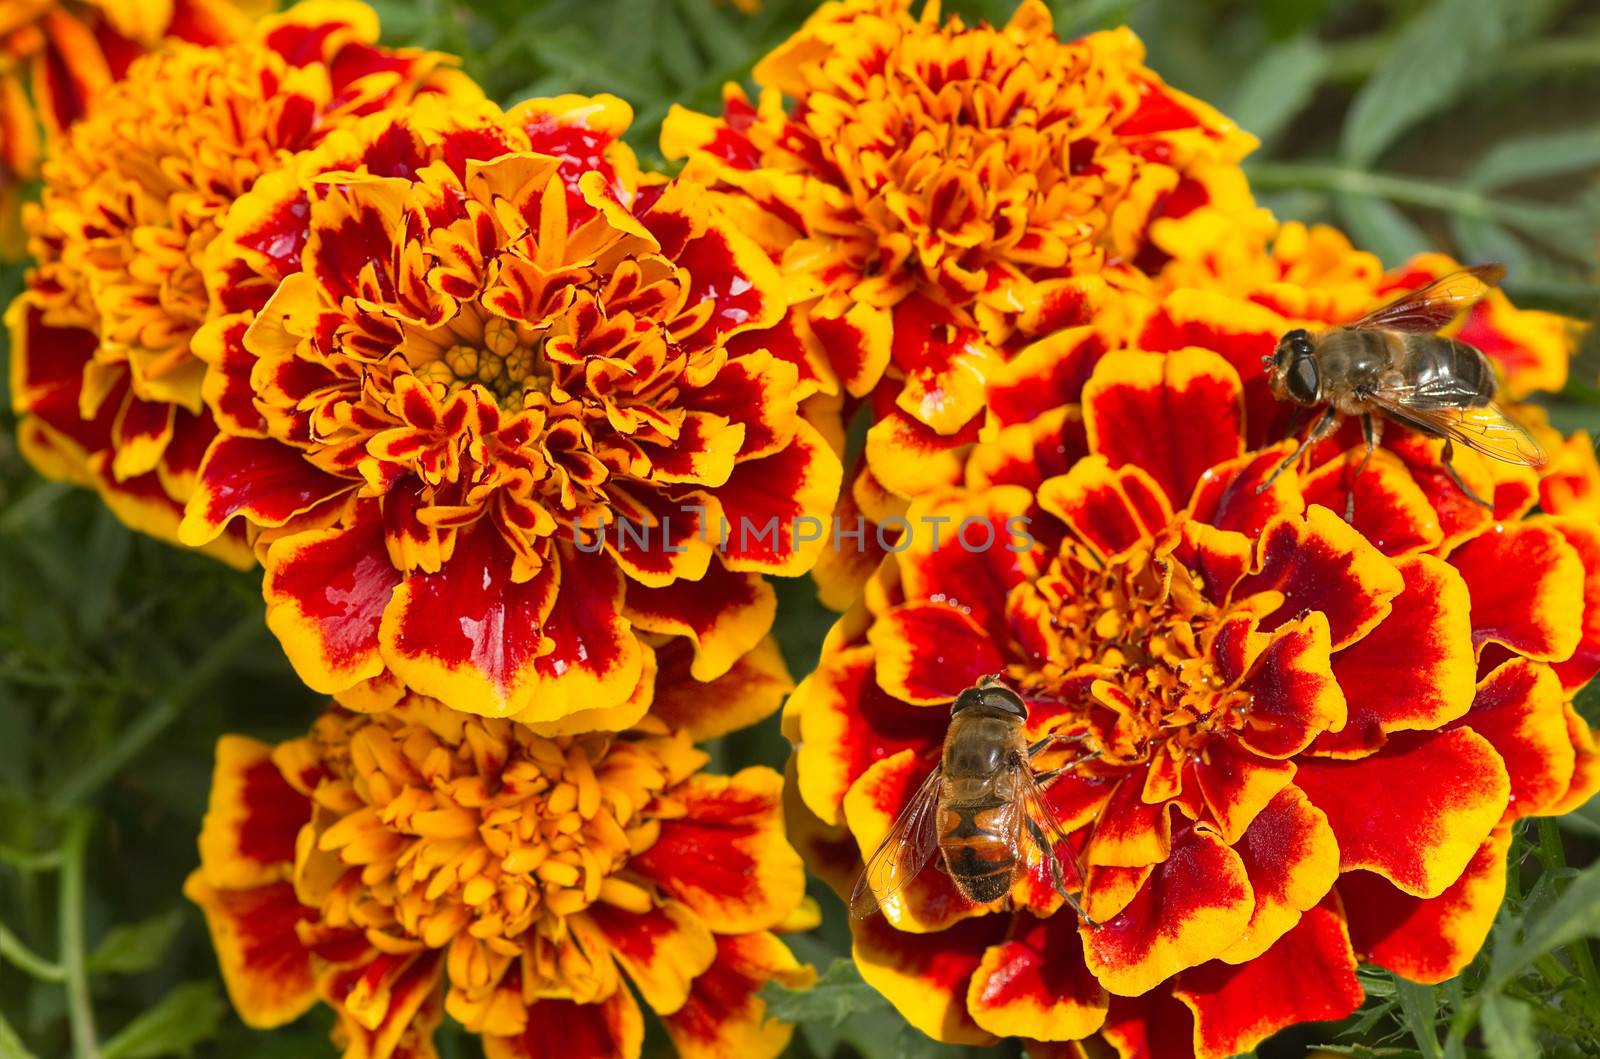 Orange and red French marigold or Tagetes patula with hoverflies in summer